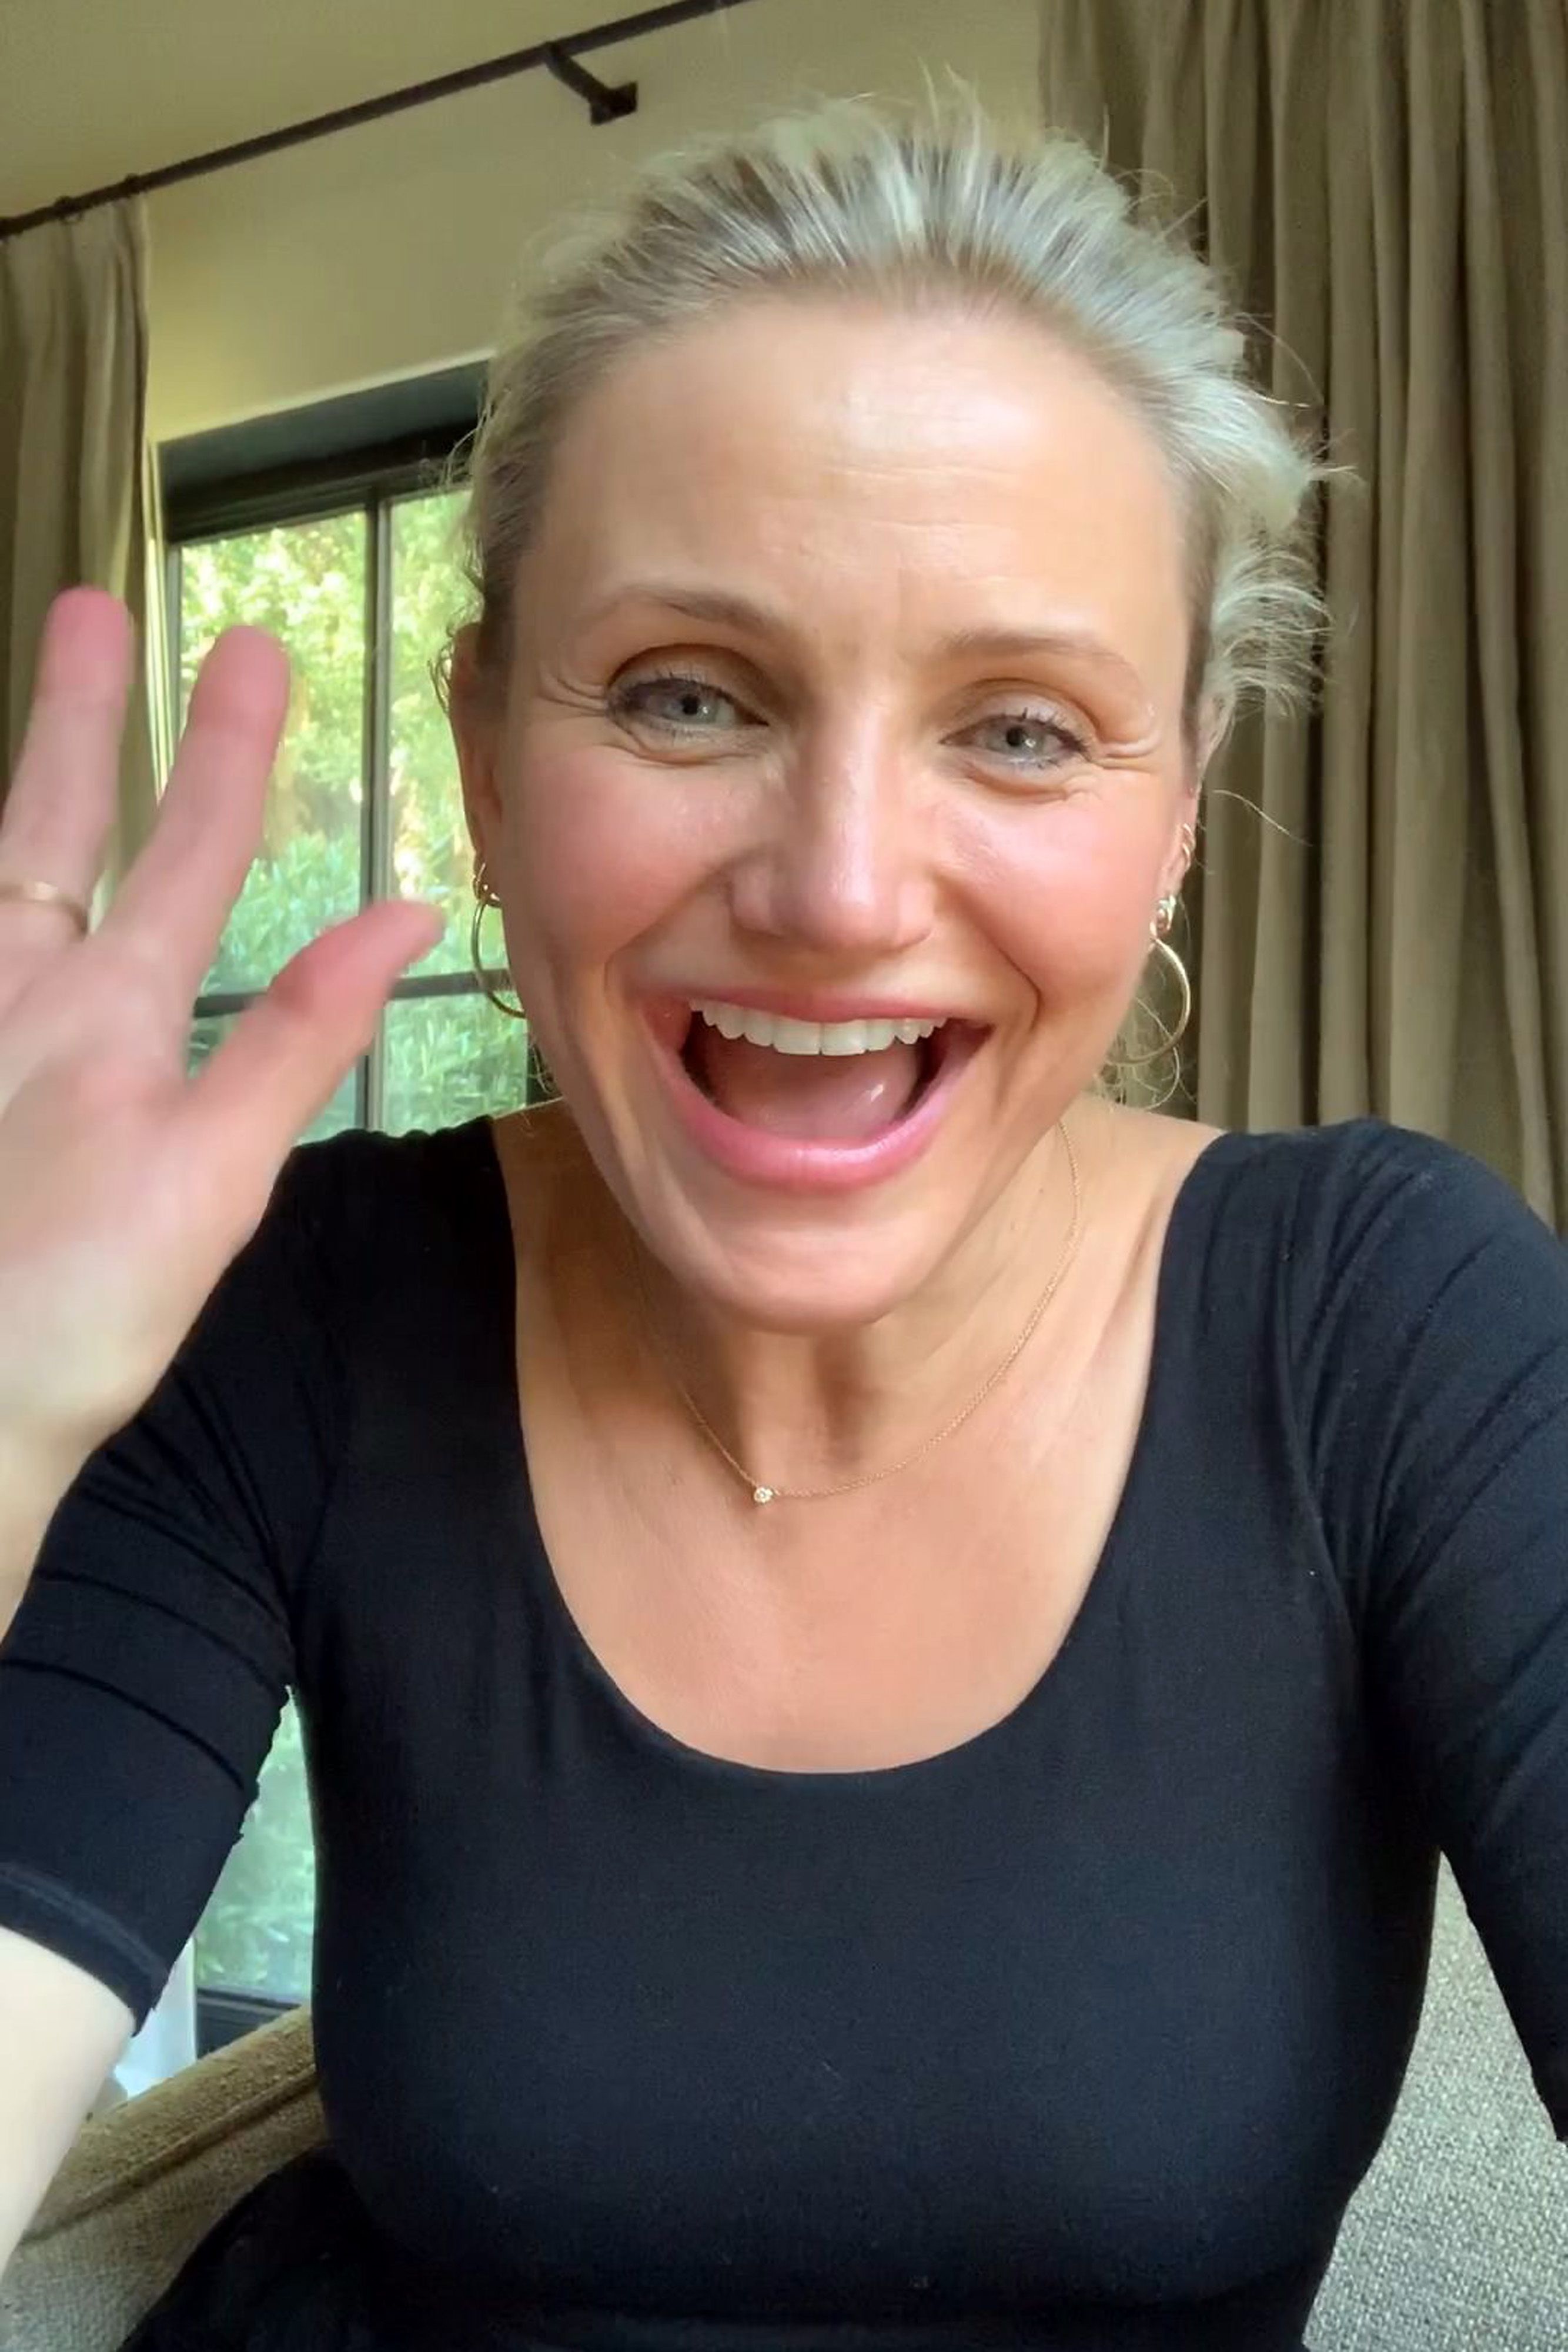 Cameron Diaz participates in "RuPaul's Digital DragCon" on May 3, 2020 | Source: Getty Images